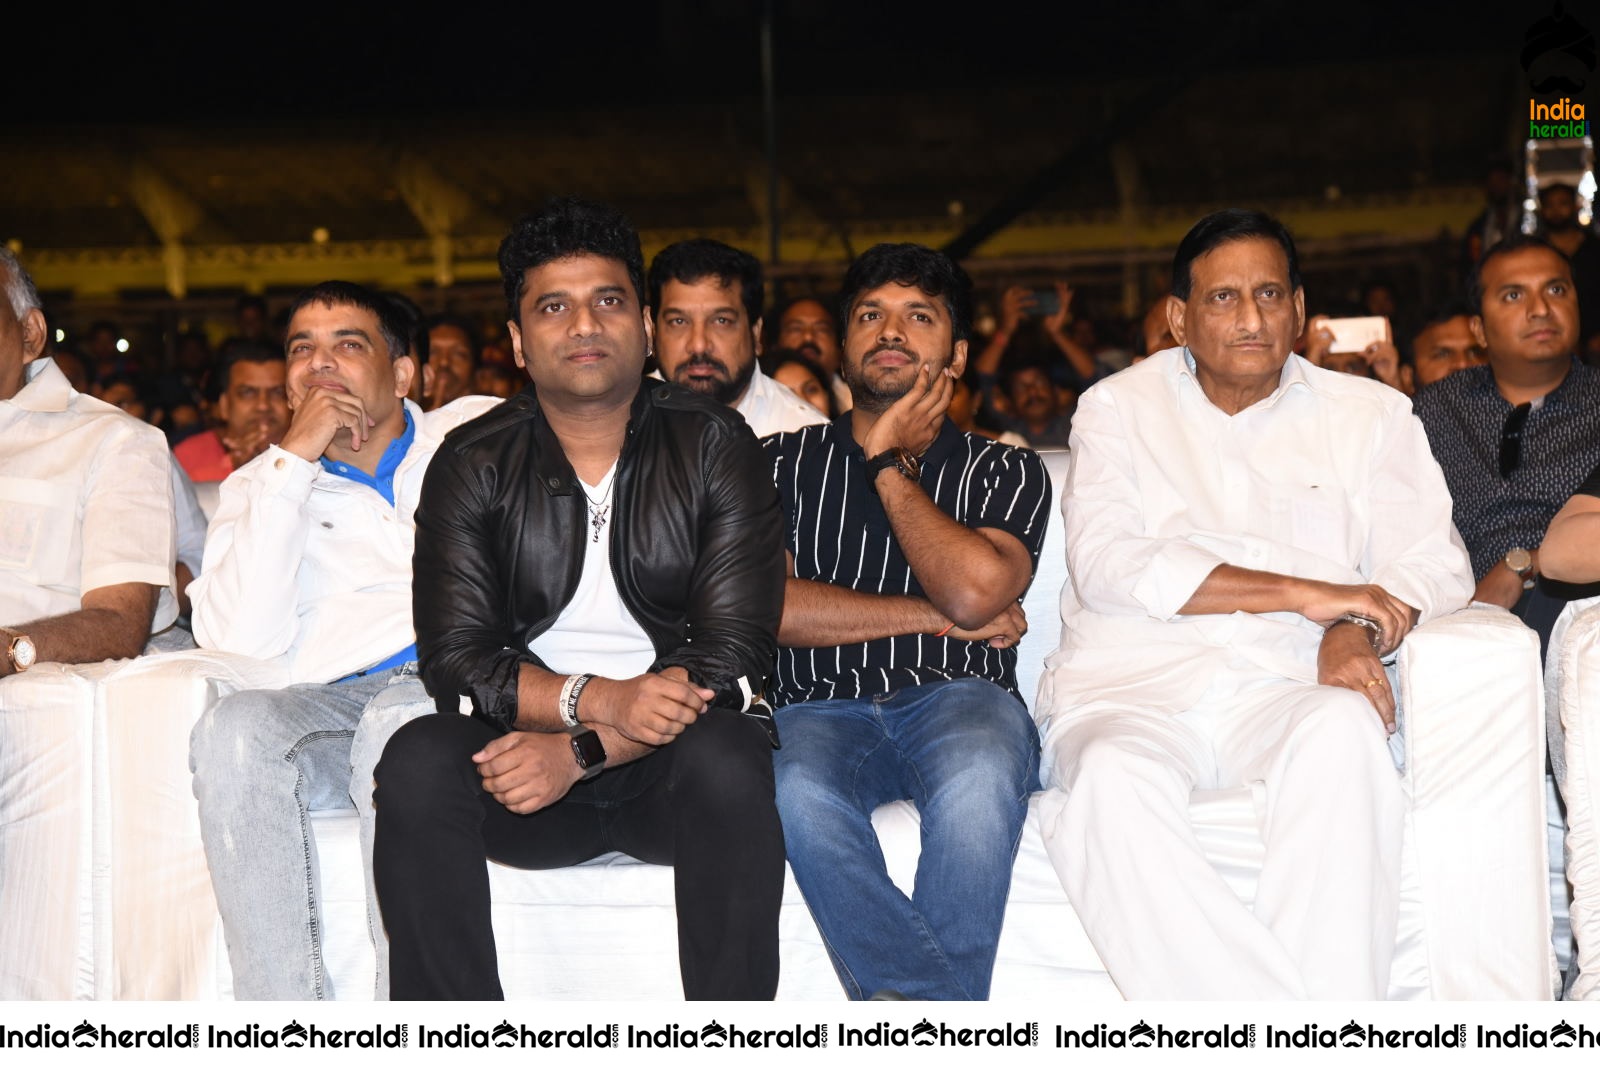 Some More Candid moments from Sarileru Neekevvaru event Set 2